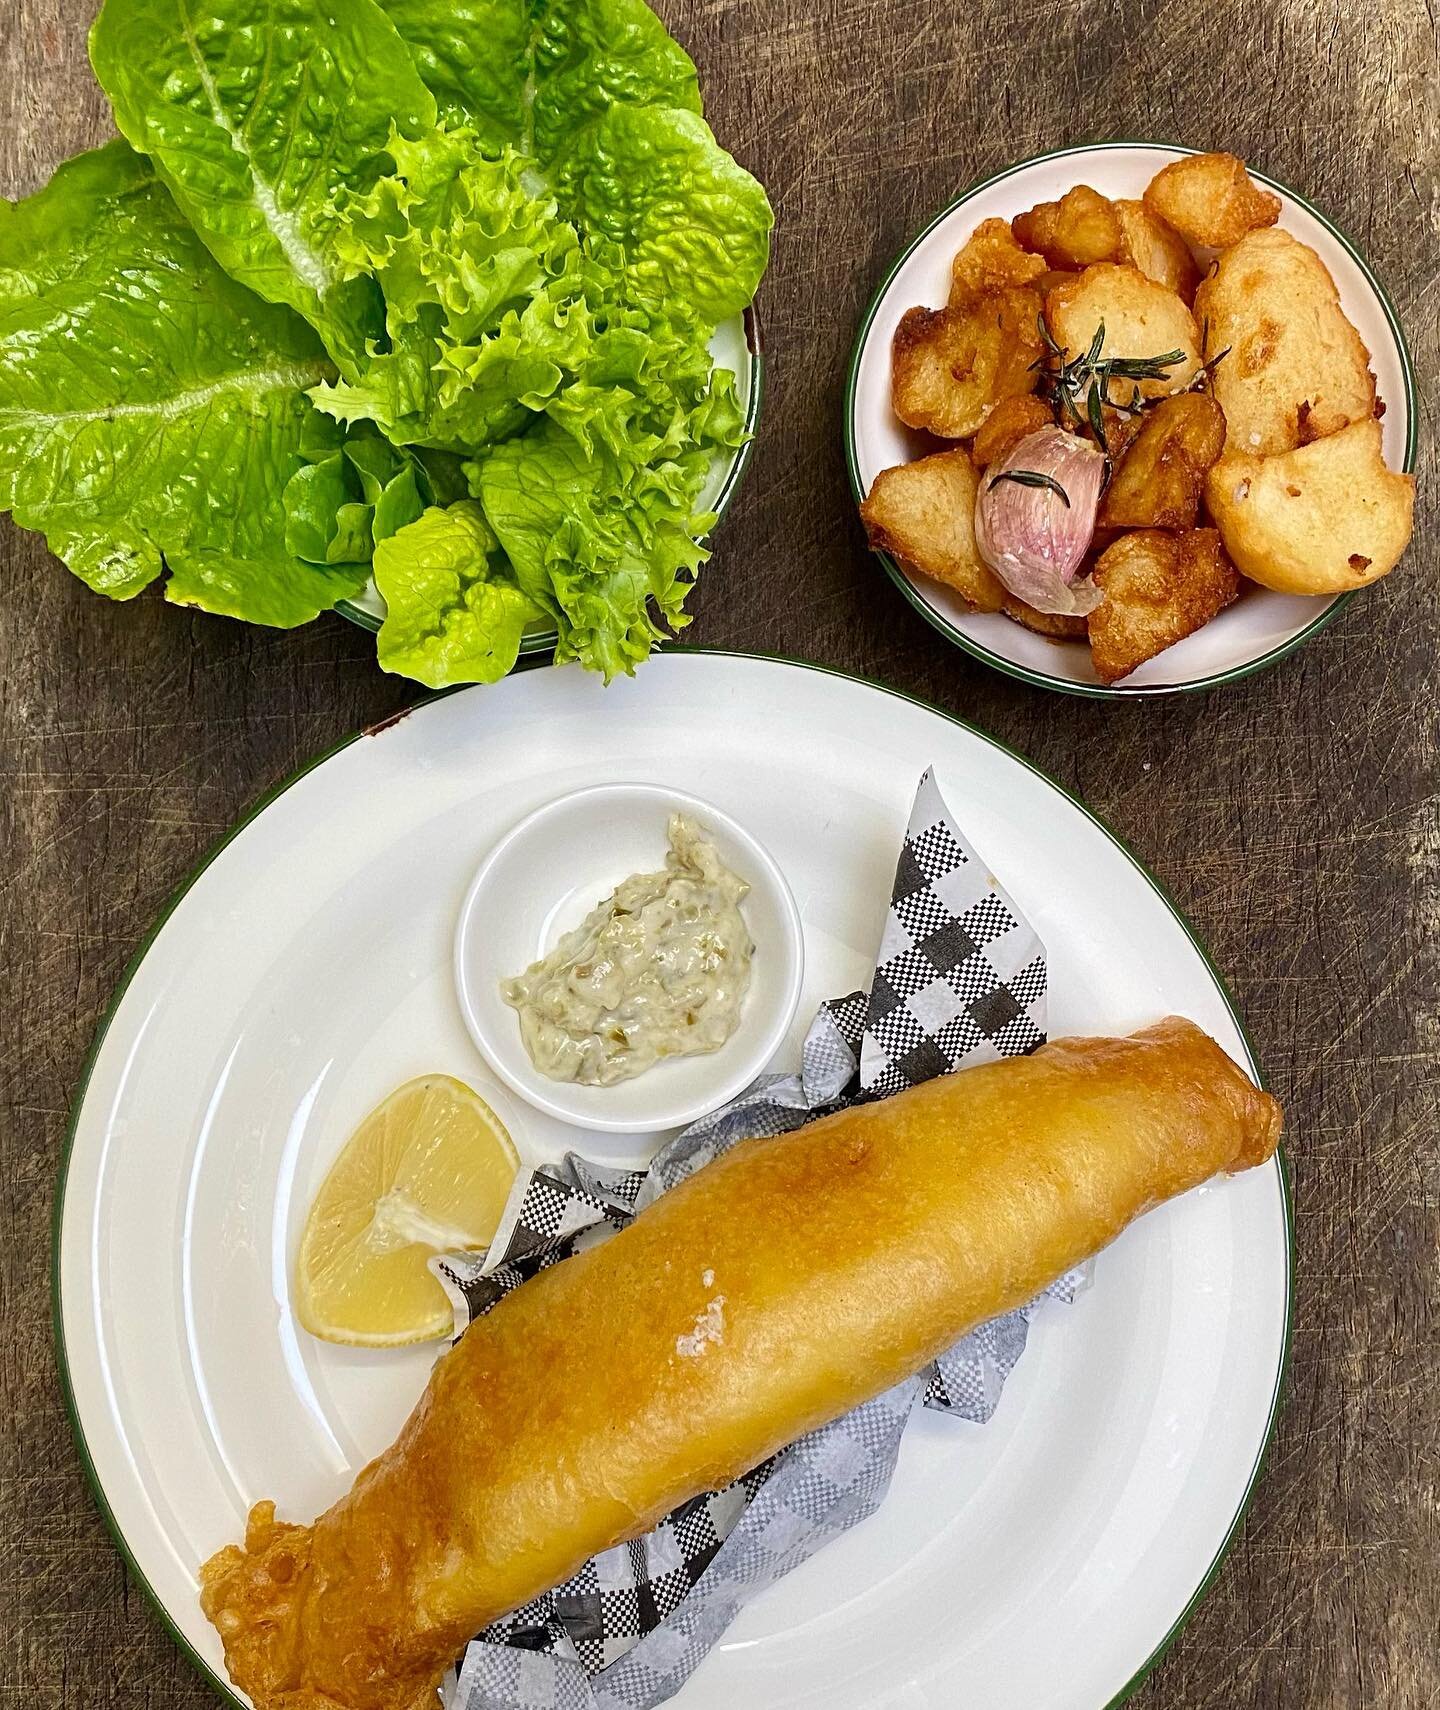 Controversial to have lettuce on the menu right now? Yes, but we&rsquo;ve got hookups. And roast potatoes instead of chips? They go better with the rosemary and garlic. 

Our fish of the day changes order to order, depending on what&rsquo;s been caug